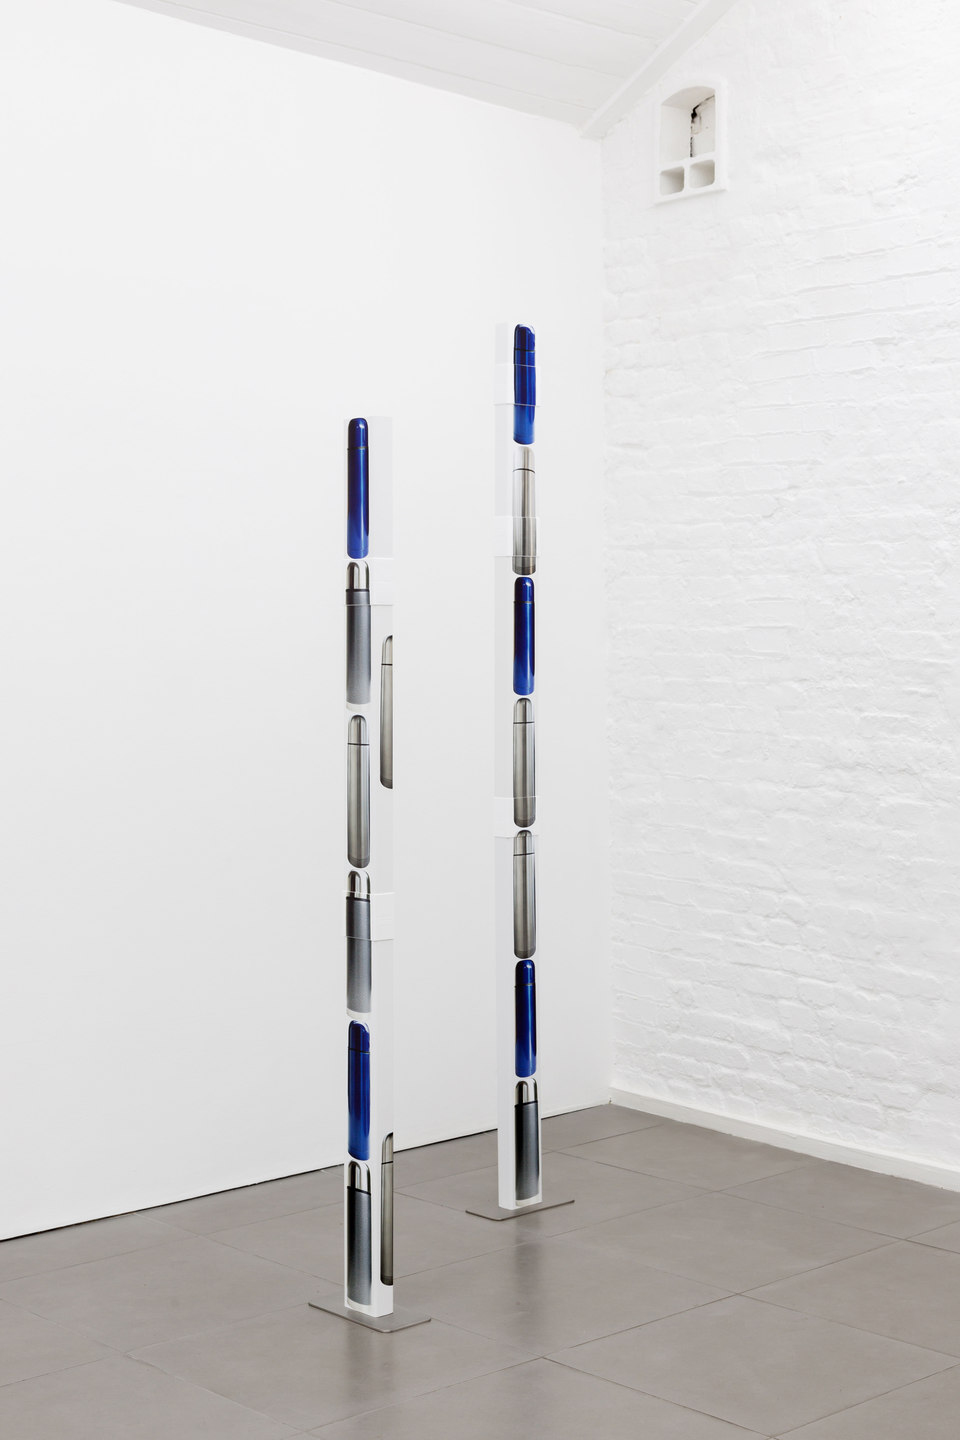 Marte Eknæs, Reboot Horizon, 'Arranged for Effect (column) I', 2012, ventilation tubes with stickers, steel foot, Cell Project Space